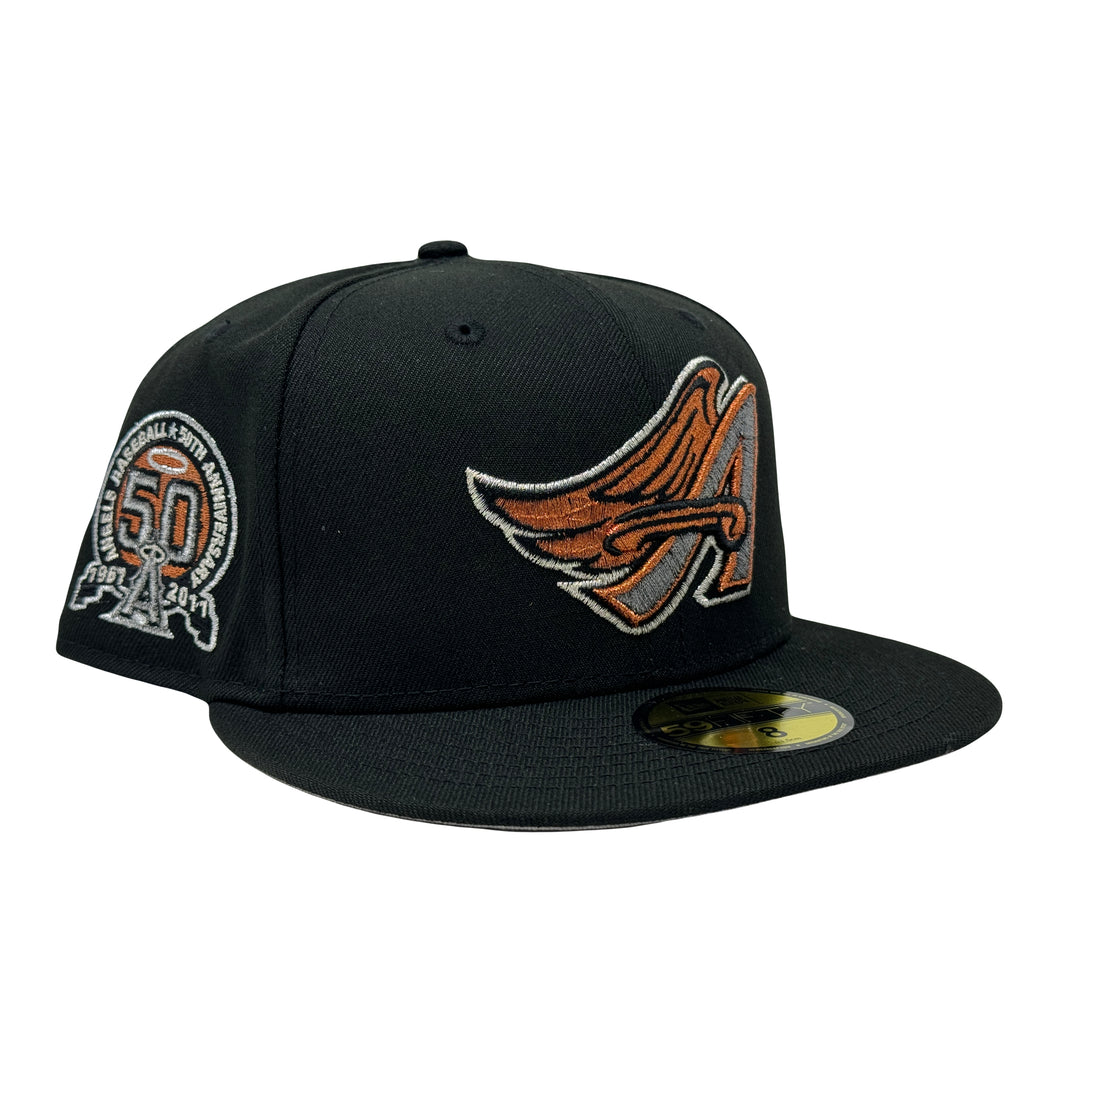 Los Angeles Angels 50th Anniversary Metallic Copper 59Fifty New Era Fitted Hat